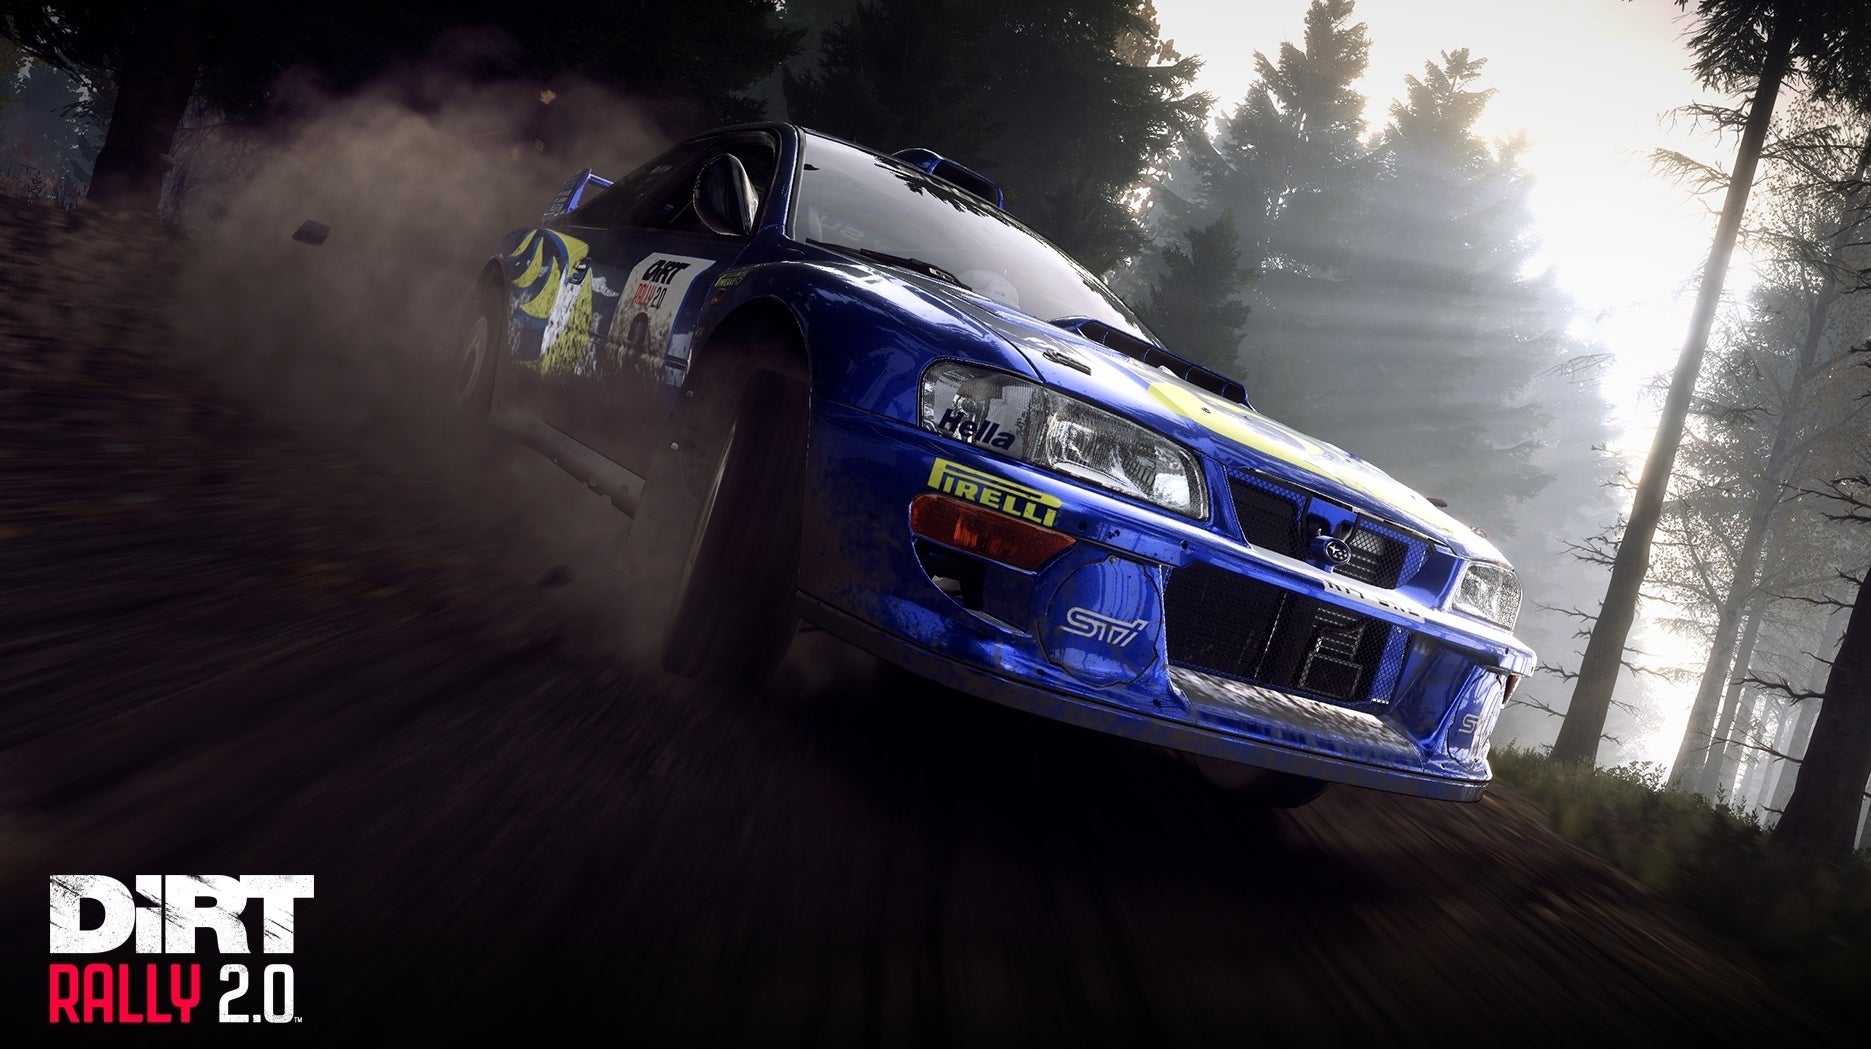 Image for Dirt Rally 2.0 is getting a Colin McRae-themed DLC pack